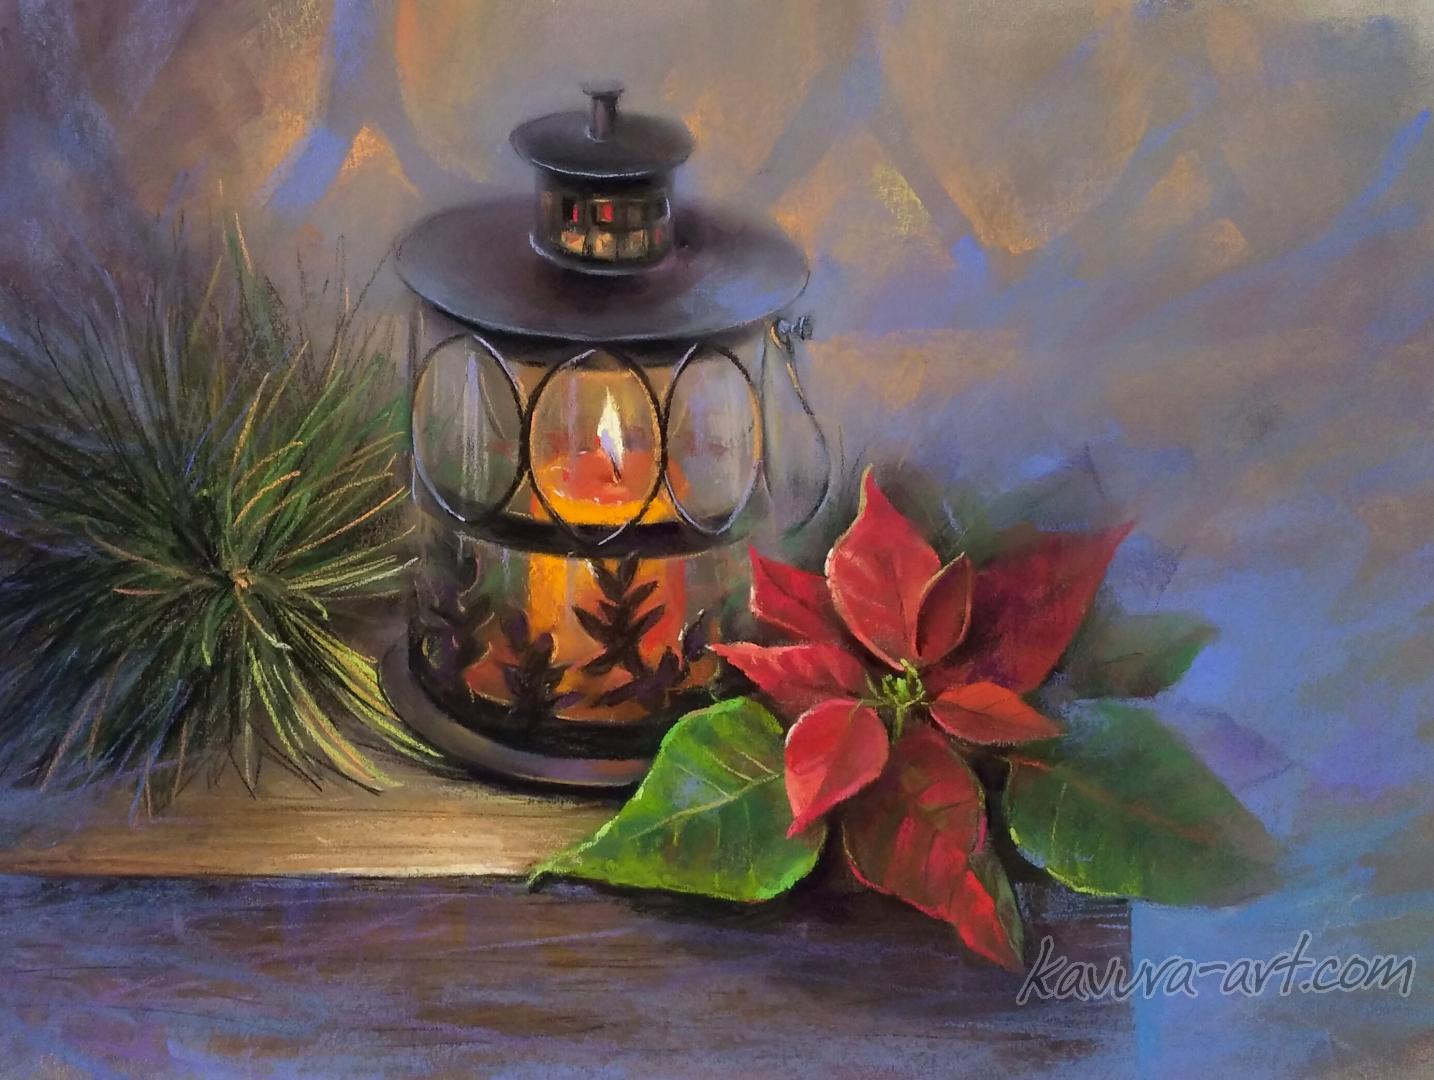 "Christmas candle" Pastel on paper.